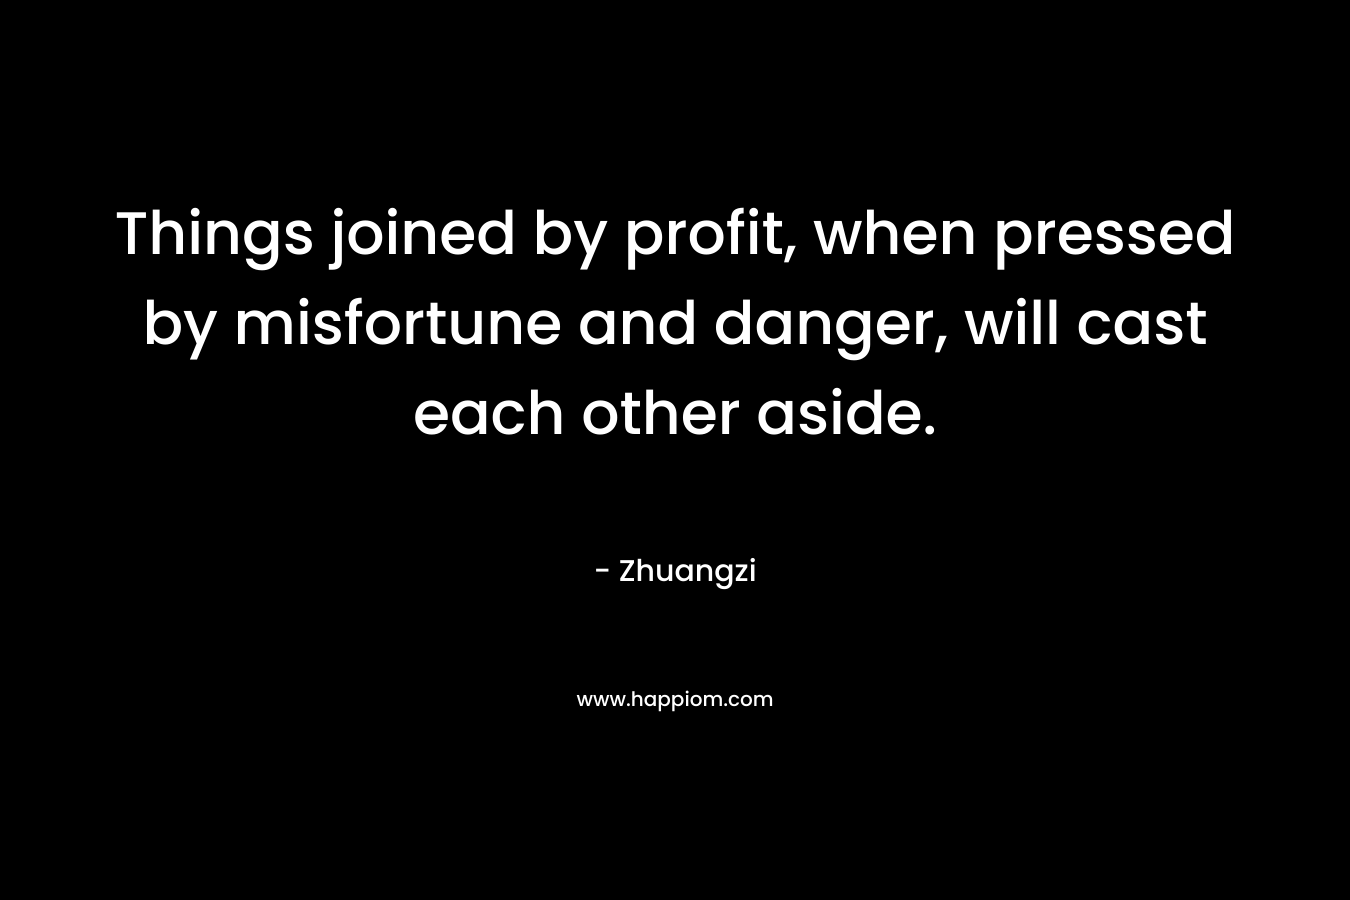 Things joined by profit, when pressed by misfortune and danger, will cast each other aside.